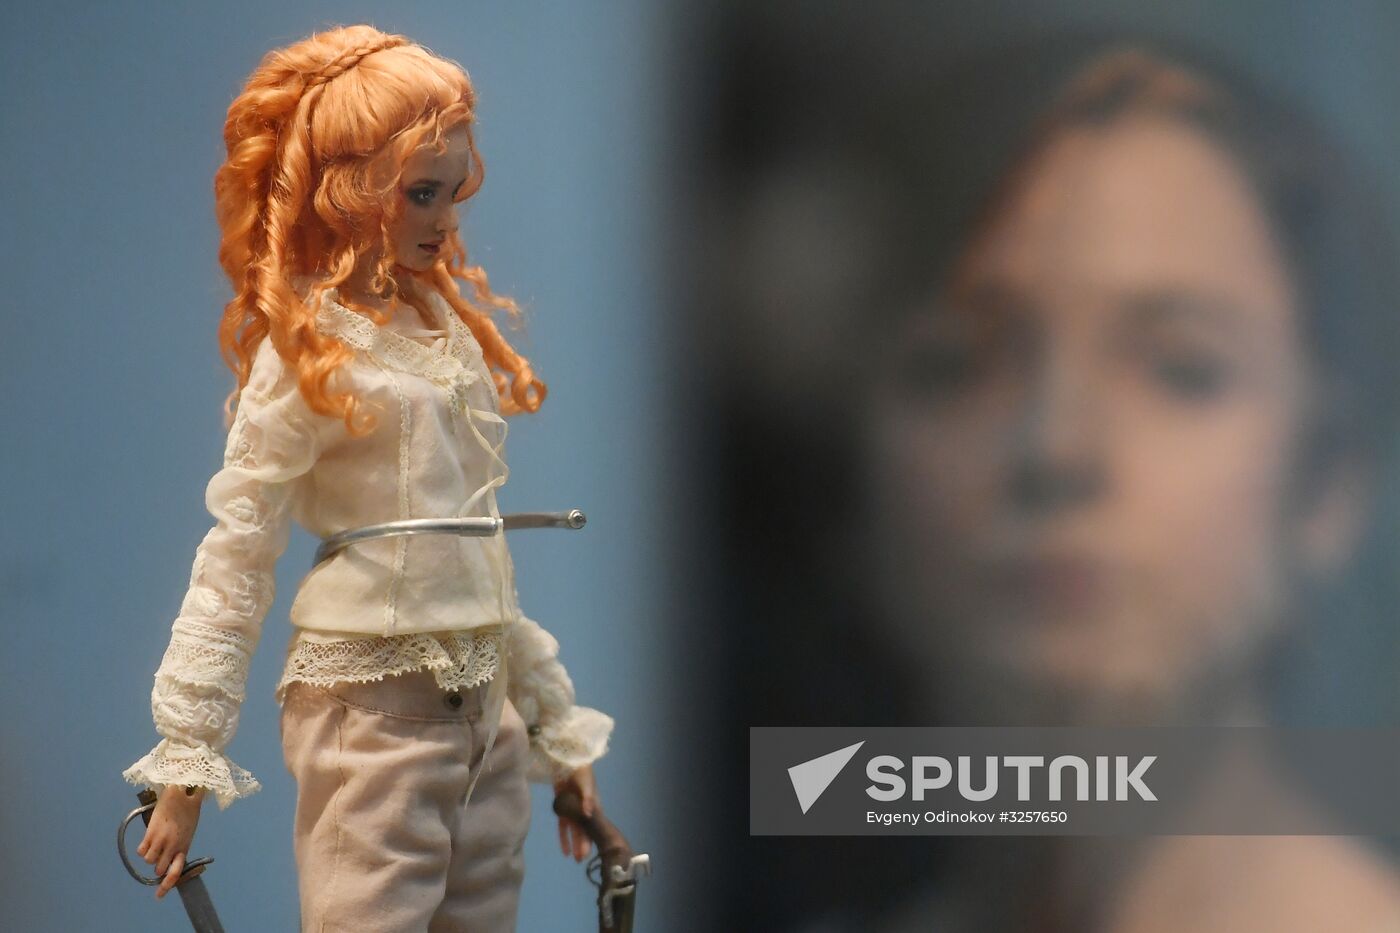 18th Art of Doll international exhibition opens in Moscow